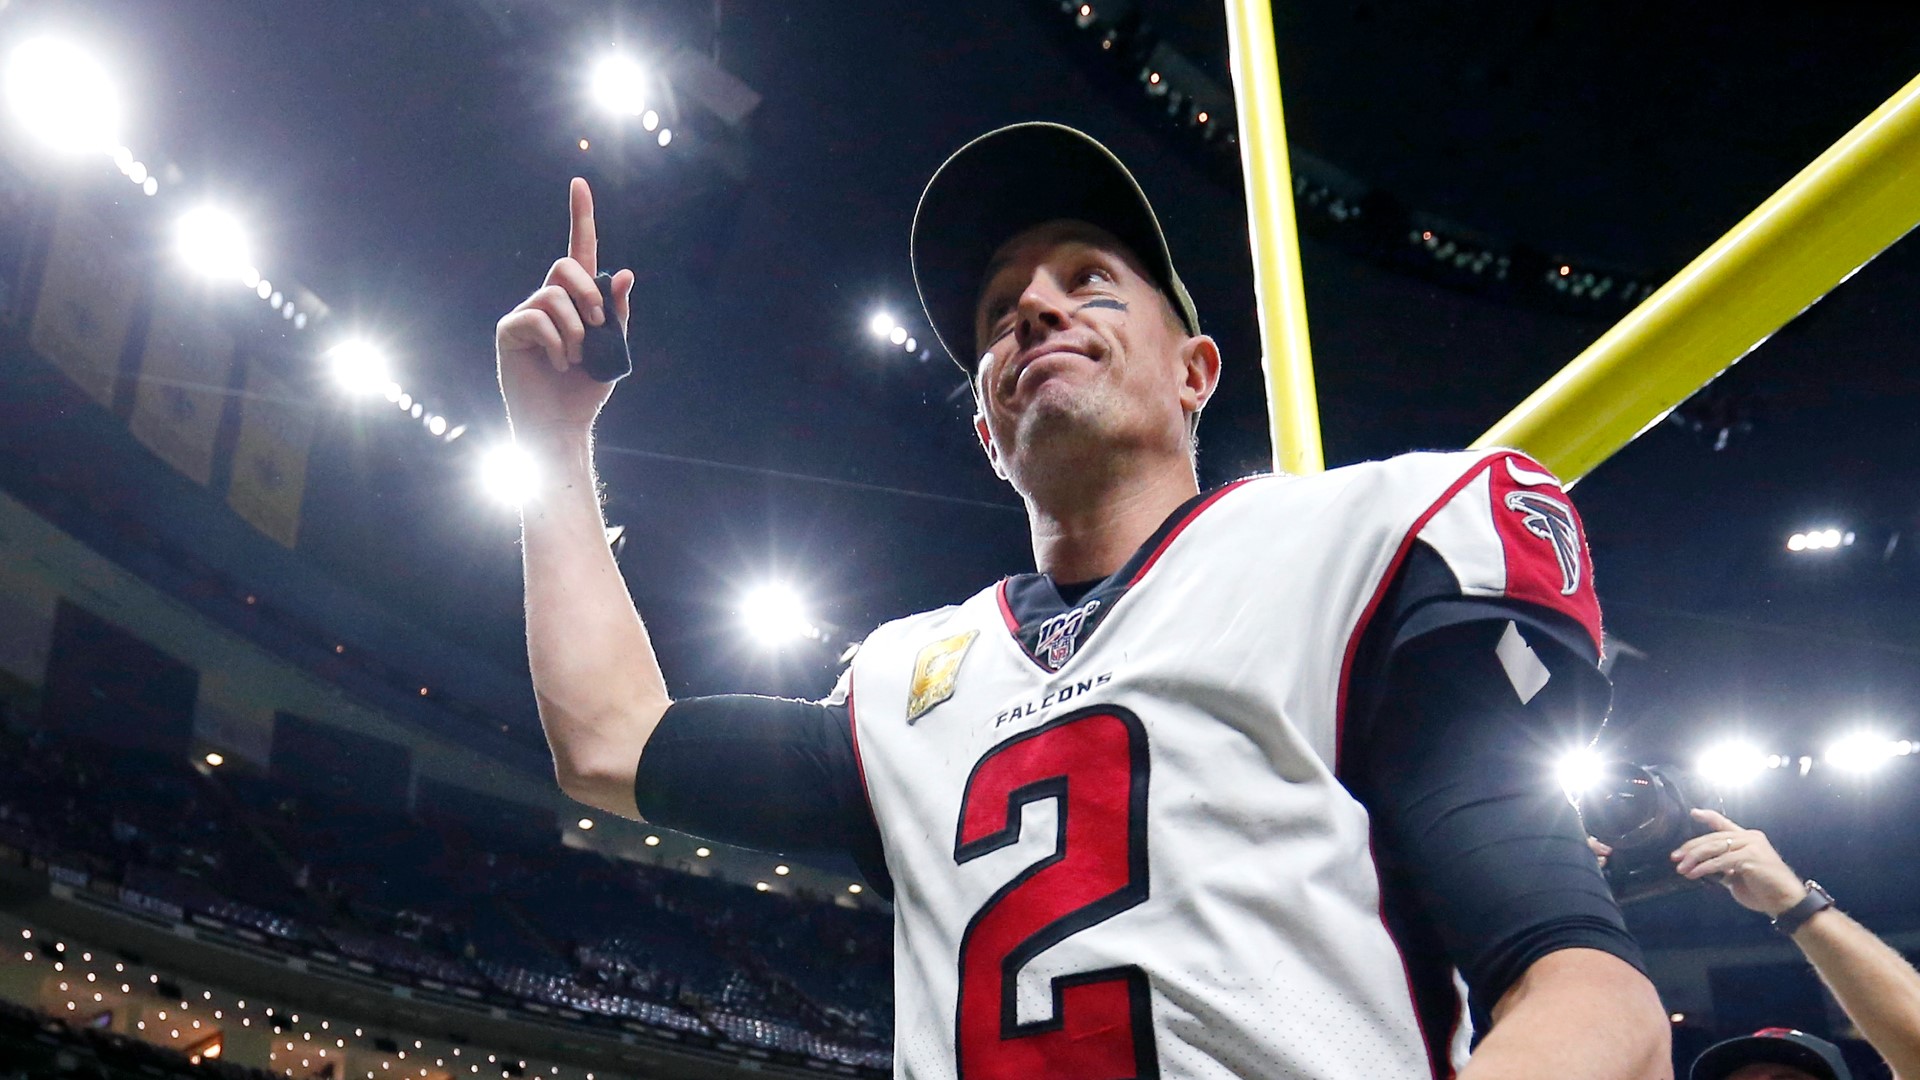 It's been a rollercoaster of a week for Atlanta sports fans. Matt Ryan has officially traded in his black and red for the Colts' blue and white.